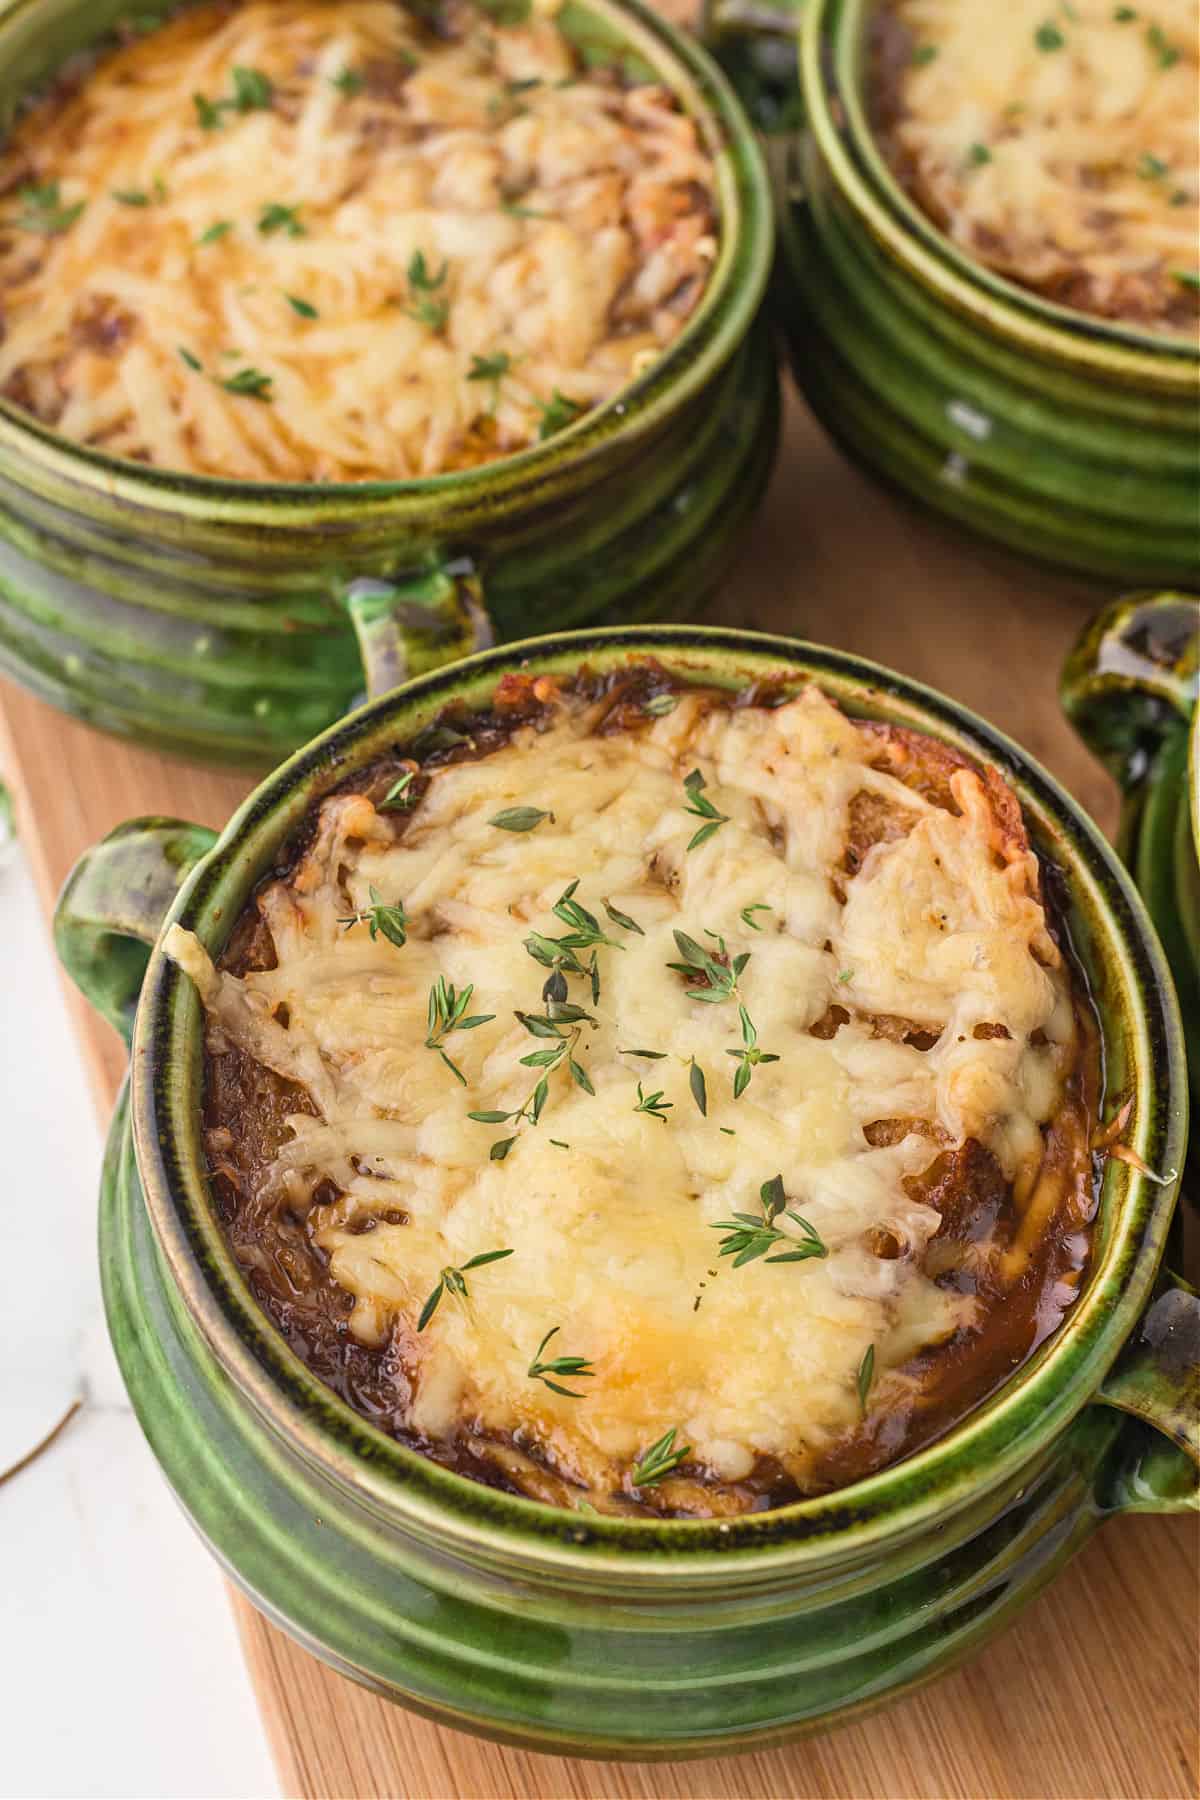 French onion soup served in green soup bowls.